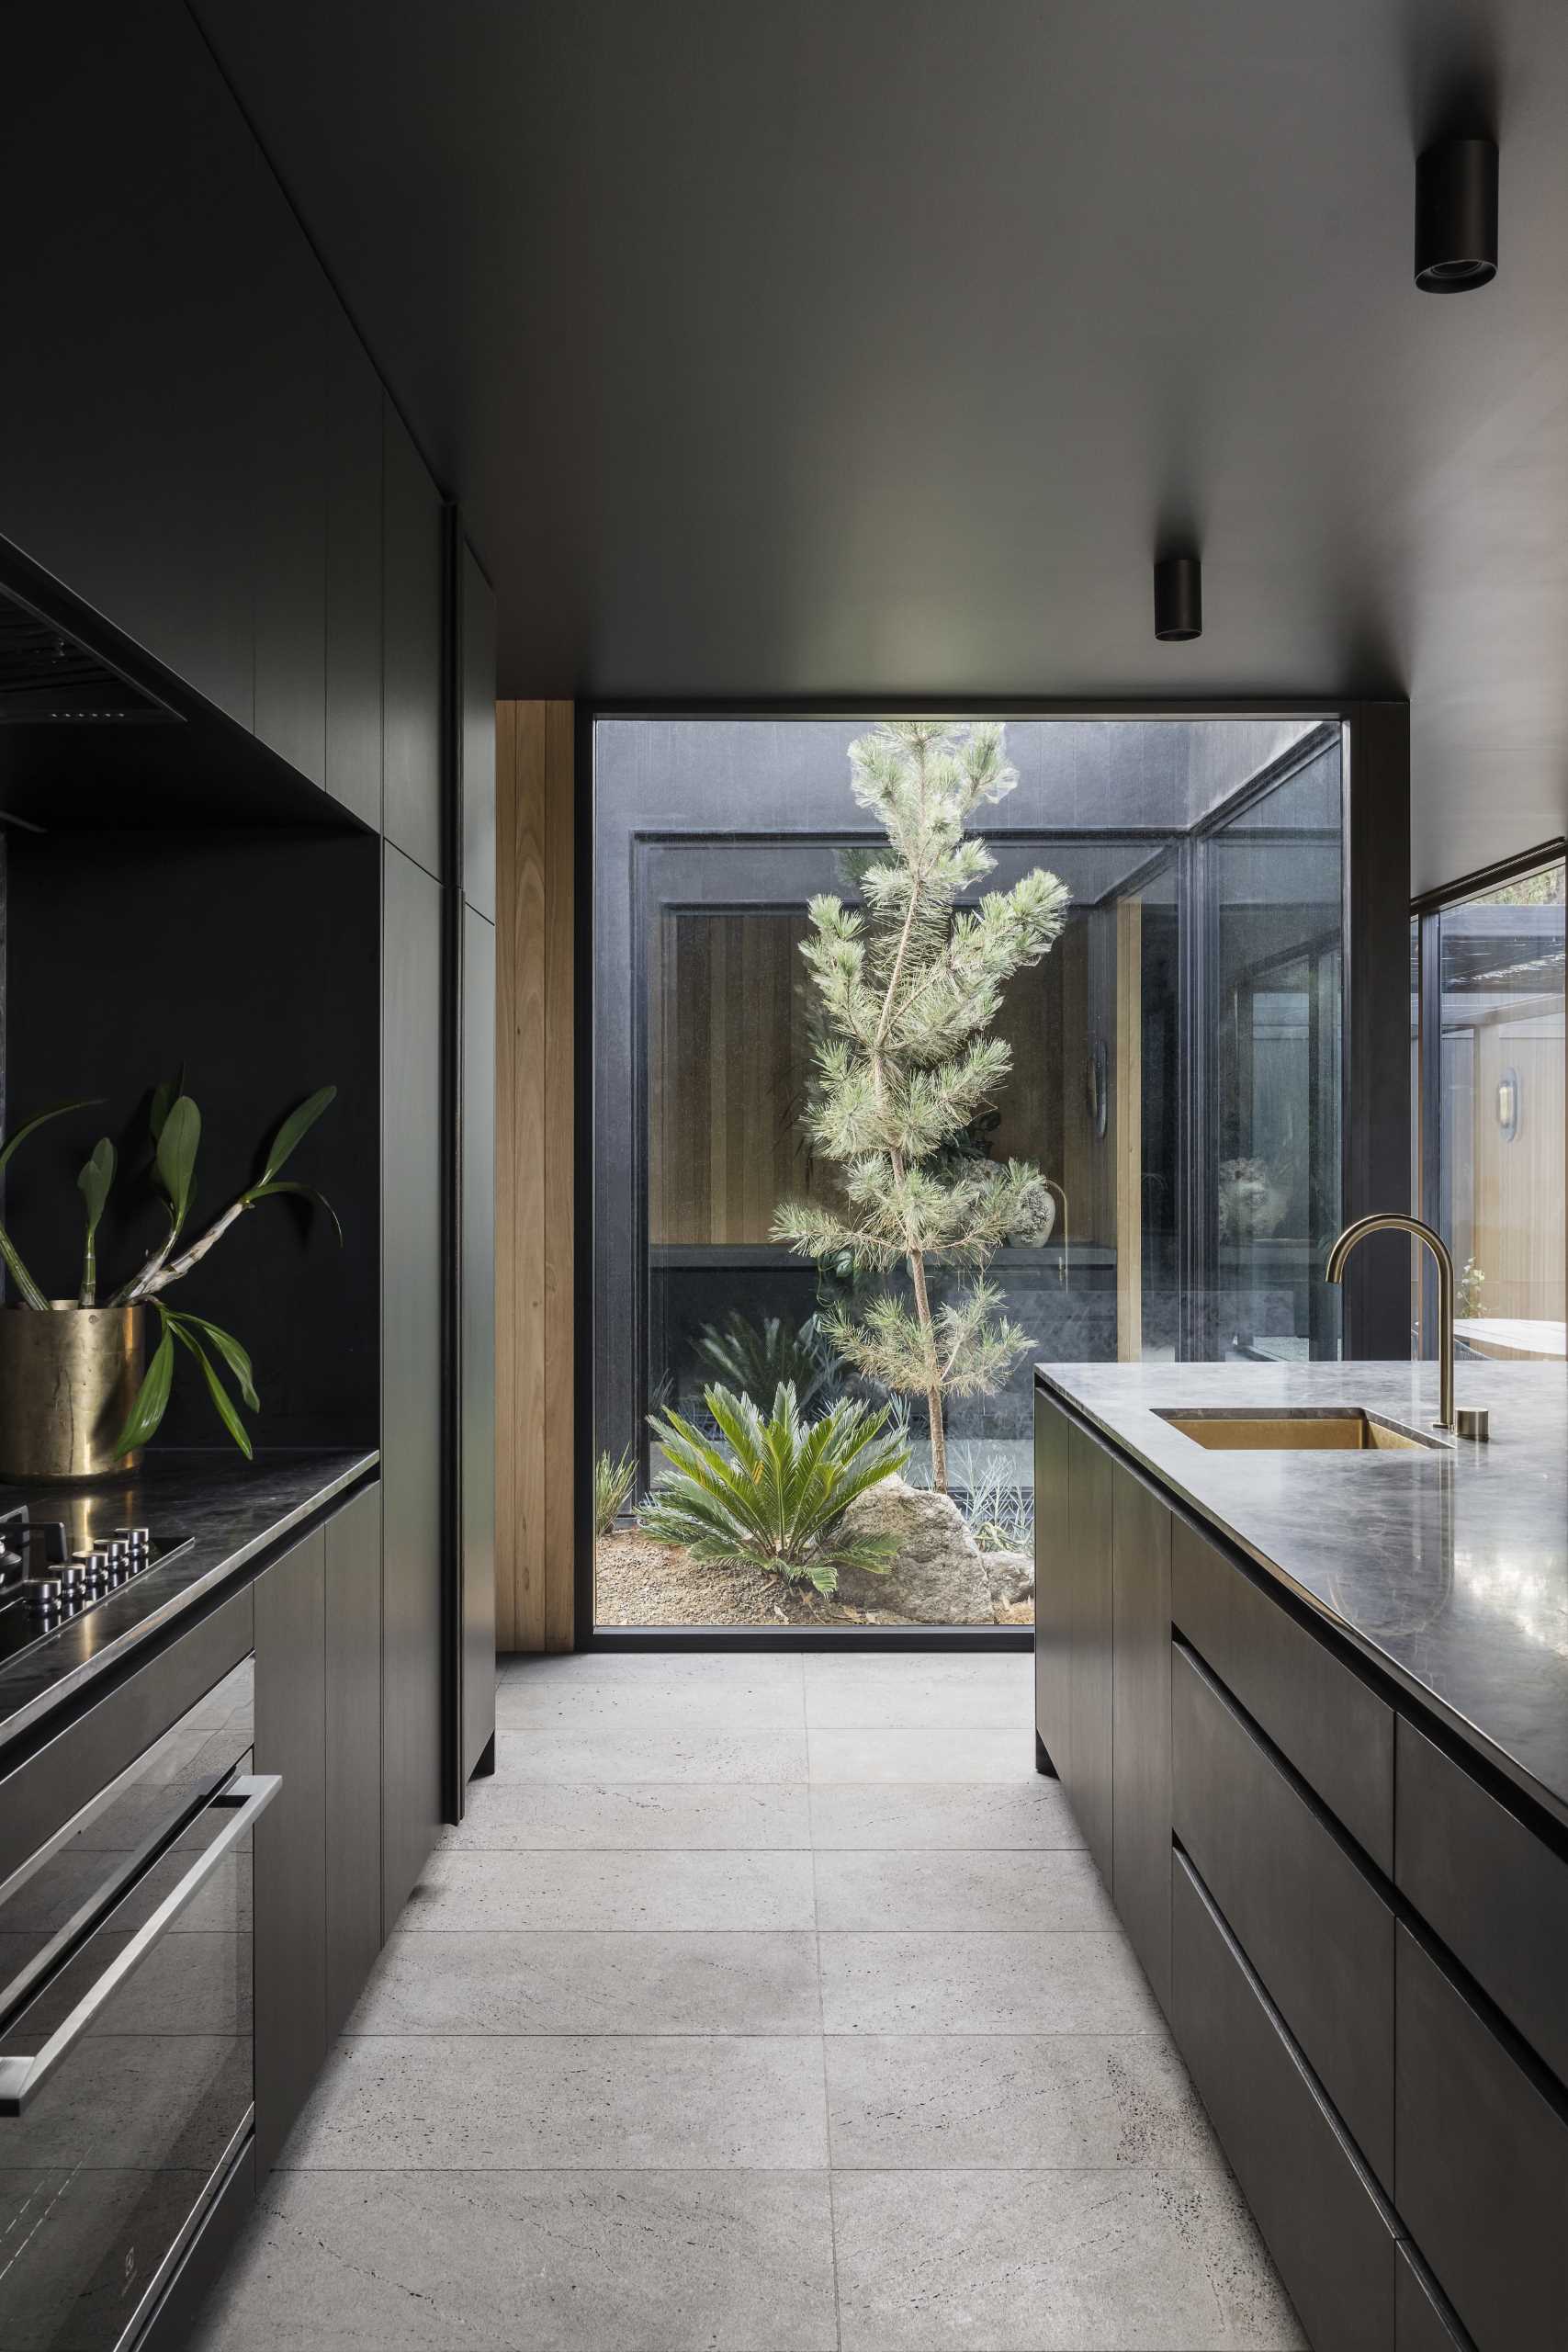 A modern kitchen with a full-wall window that provides a view of a small garden outside.